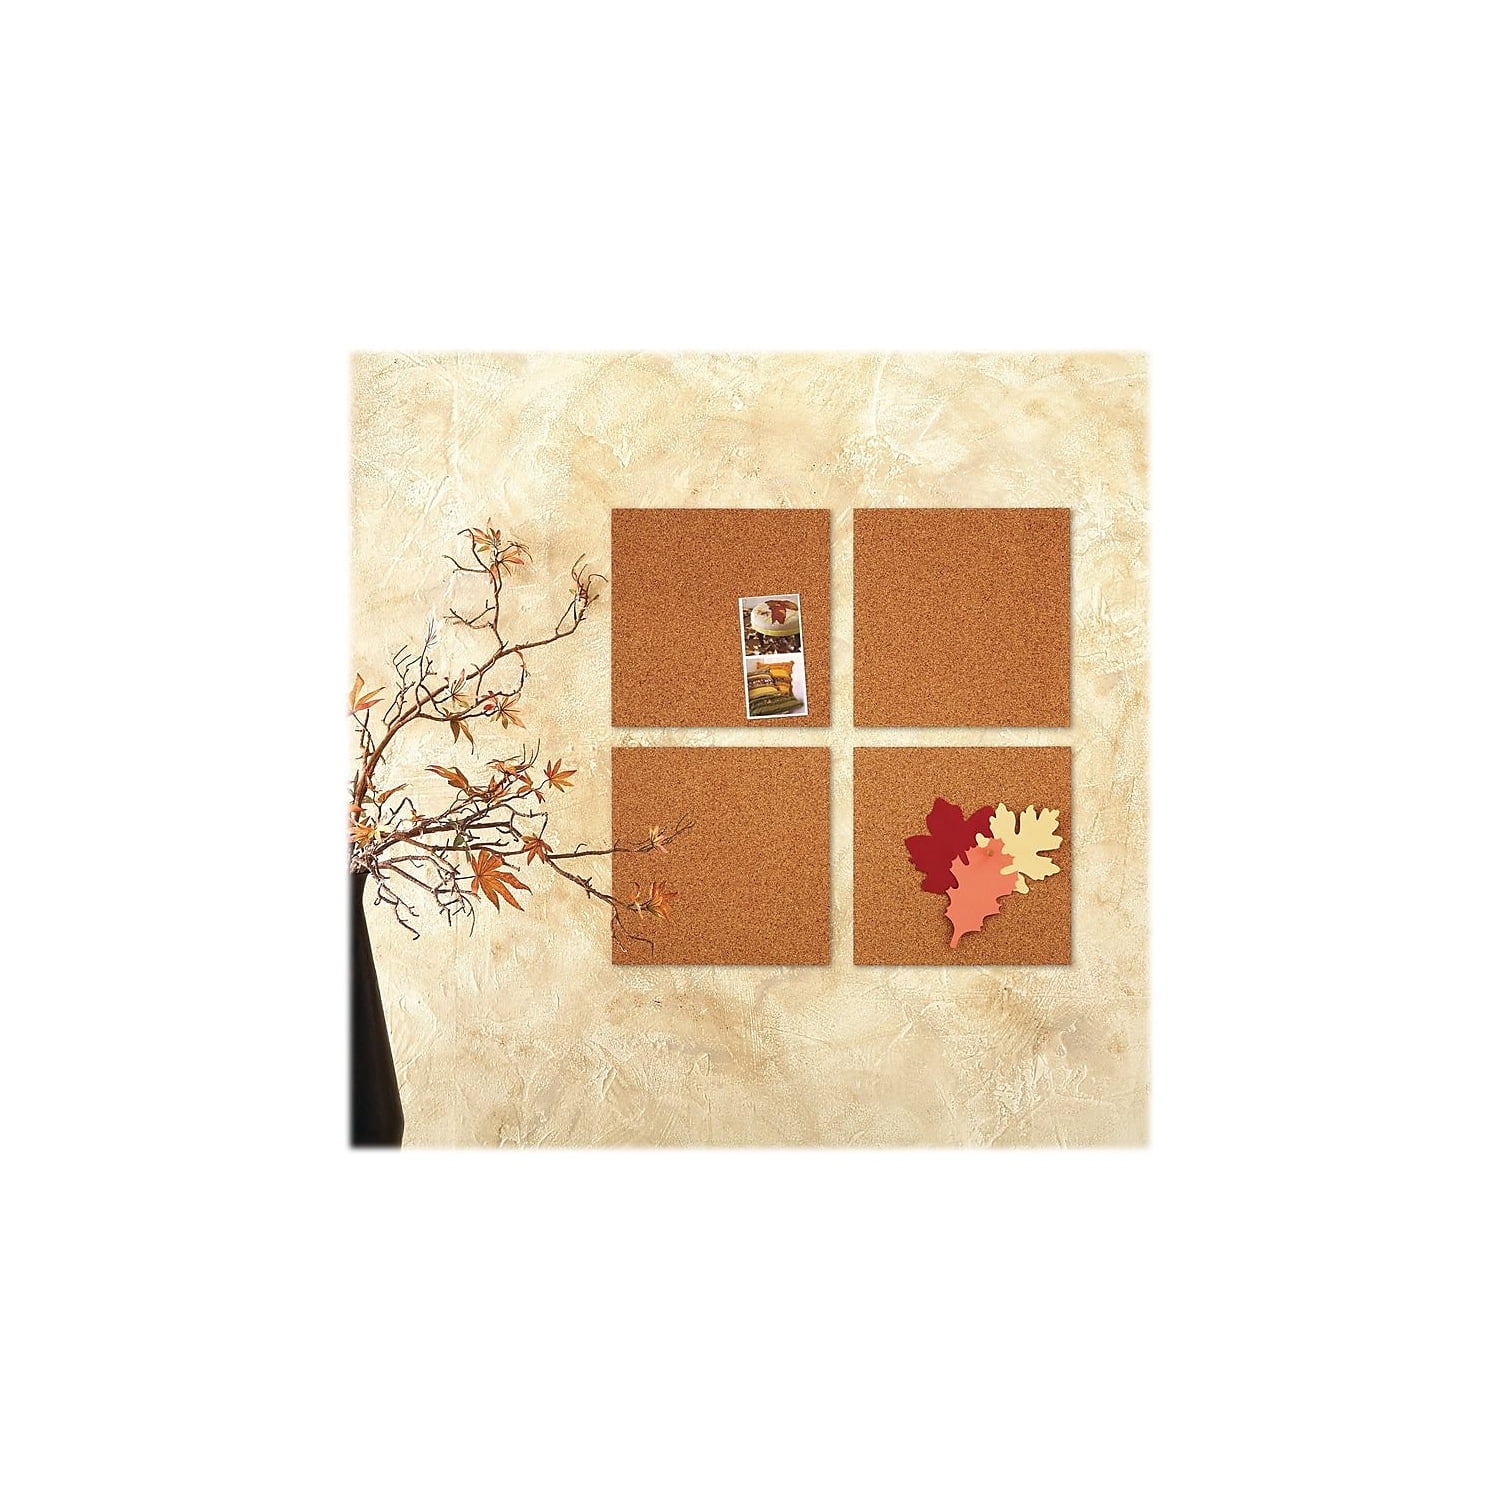 Cork Tiles cork board wall mount 1/4 x 12 x 12 in. 4 pc. With Mounting Tape